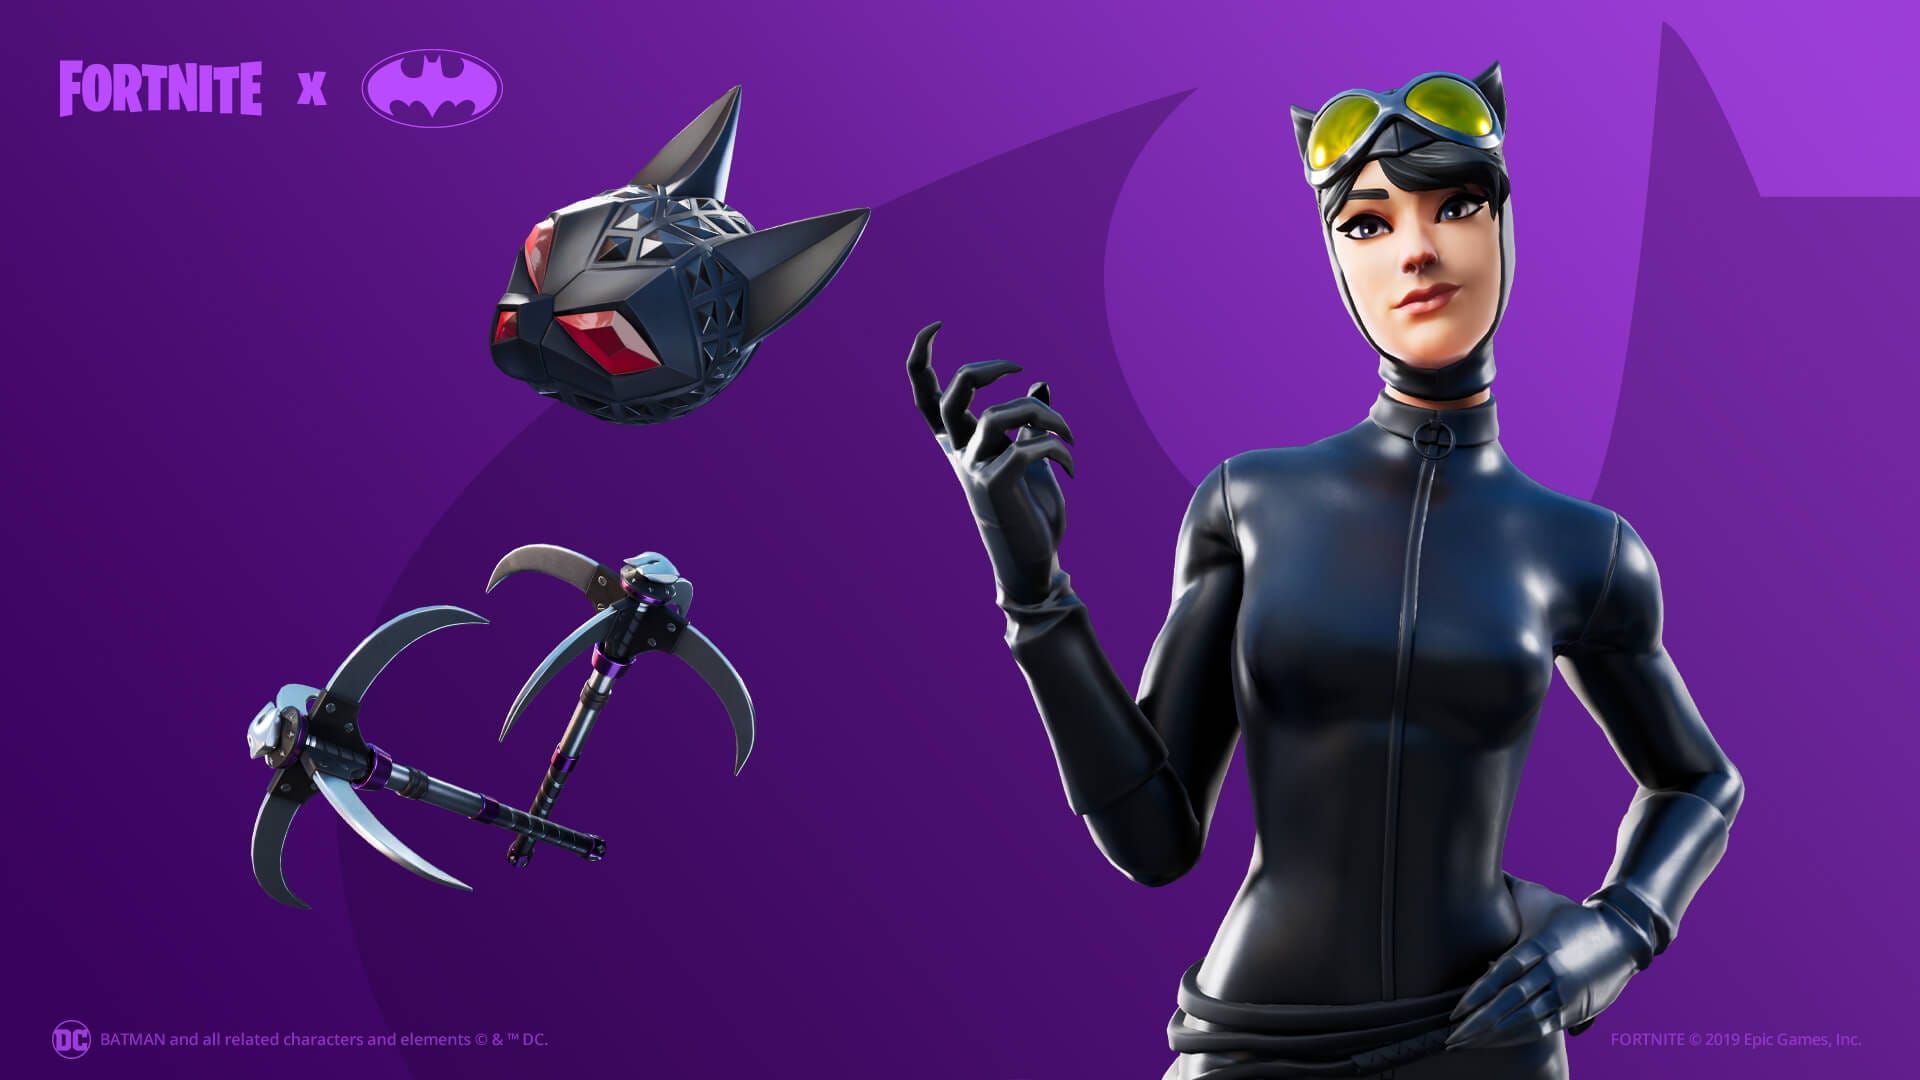 Batman has joined the cast of 'Fortnite' to celebrate the 80th